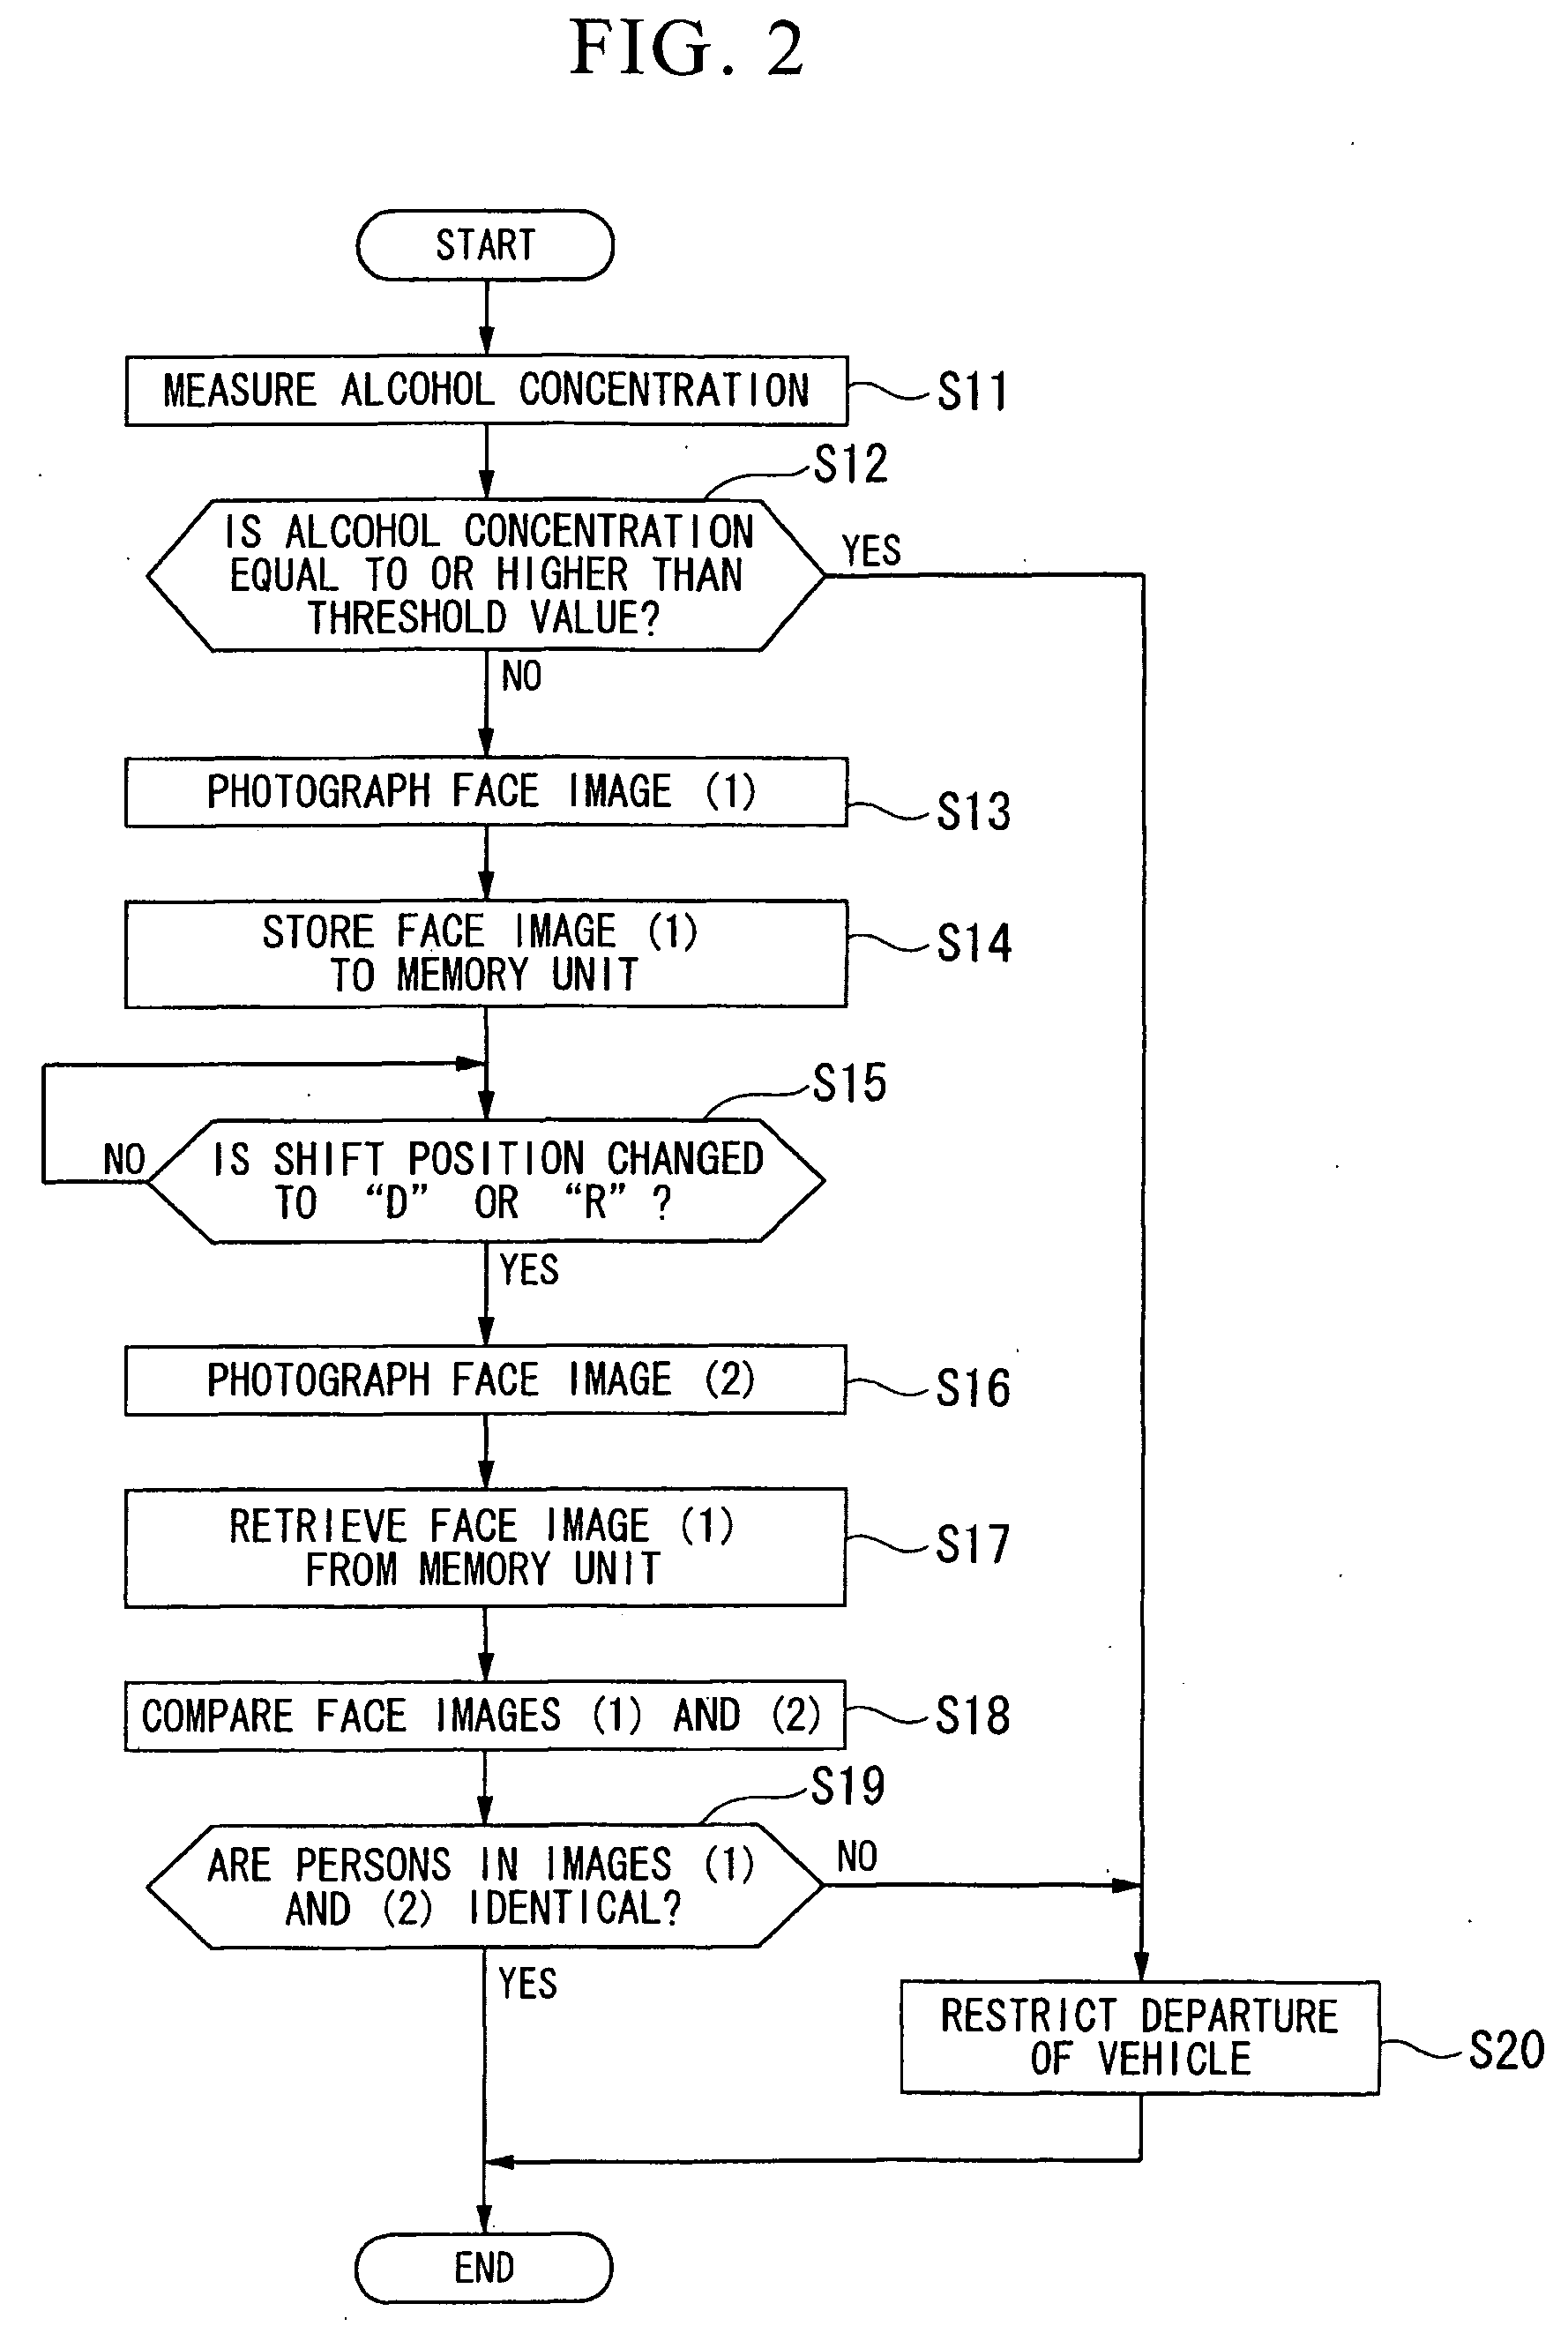 Anti-drunk driving apparatus for vehicle